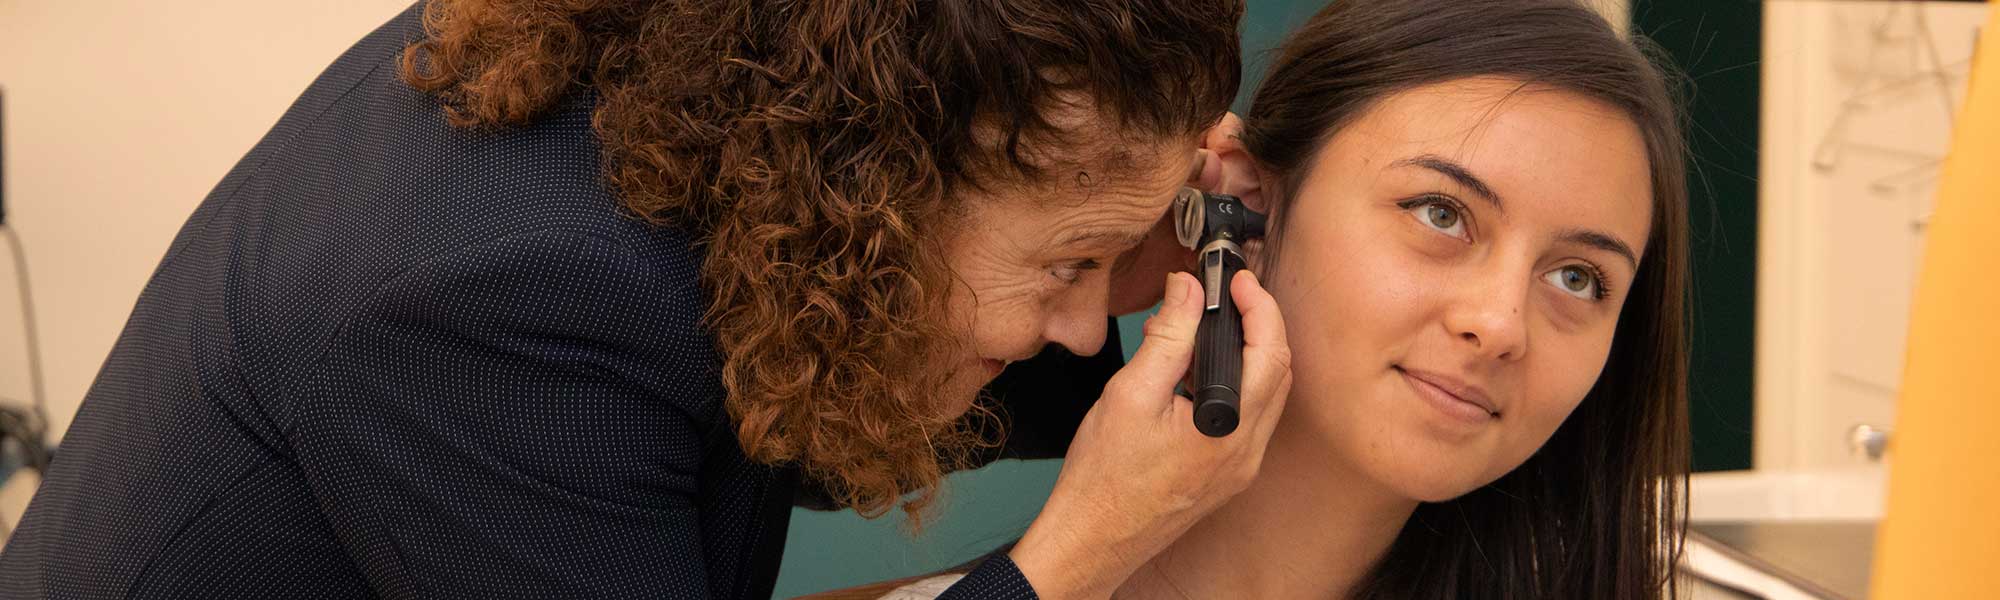 A professional looking into a patient's ear